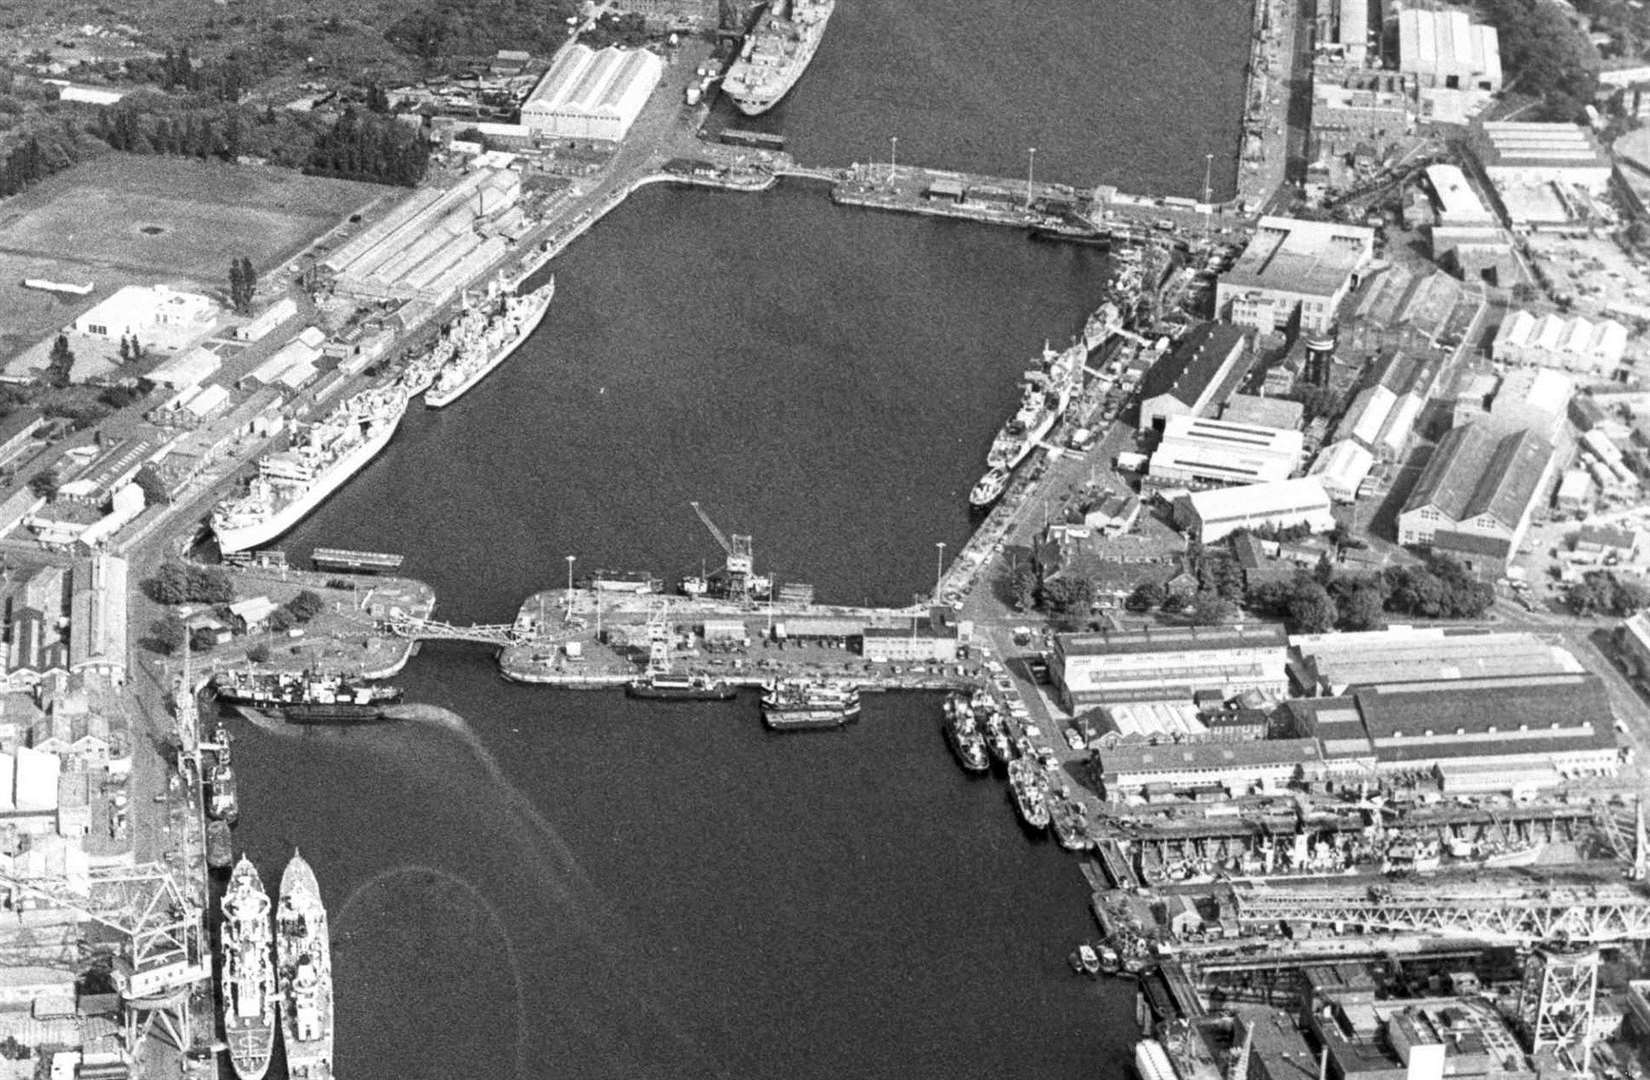 An aerial view of one probable target - Chatham docks - in 1975